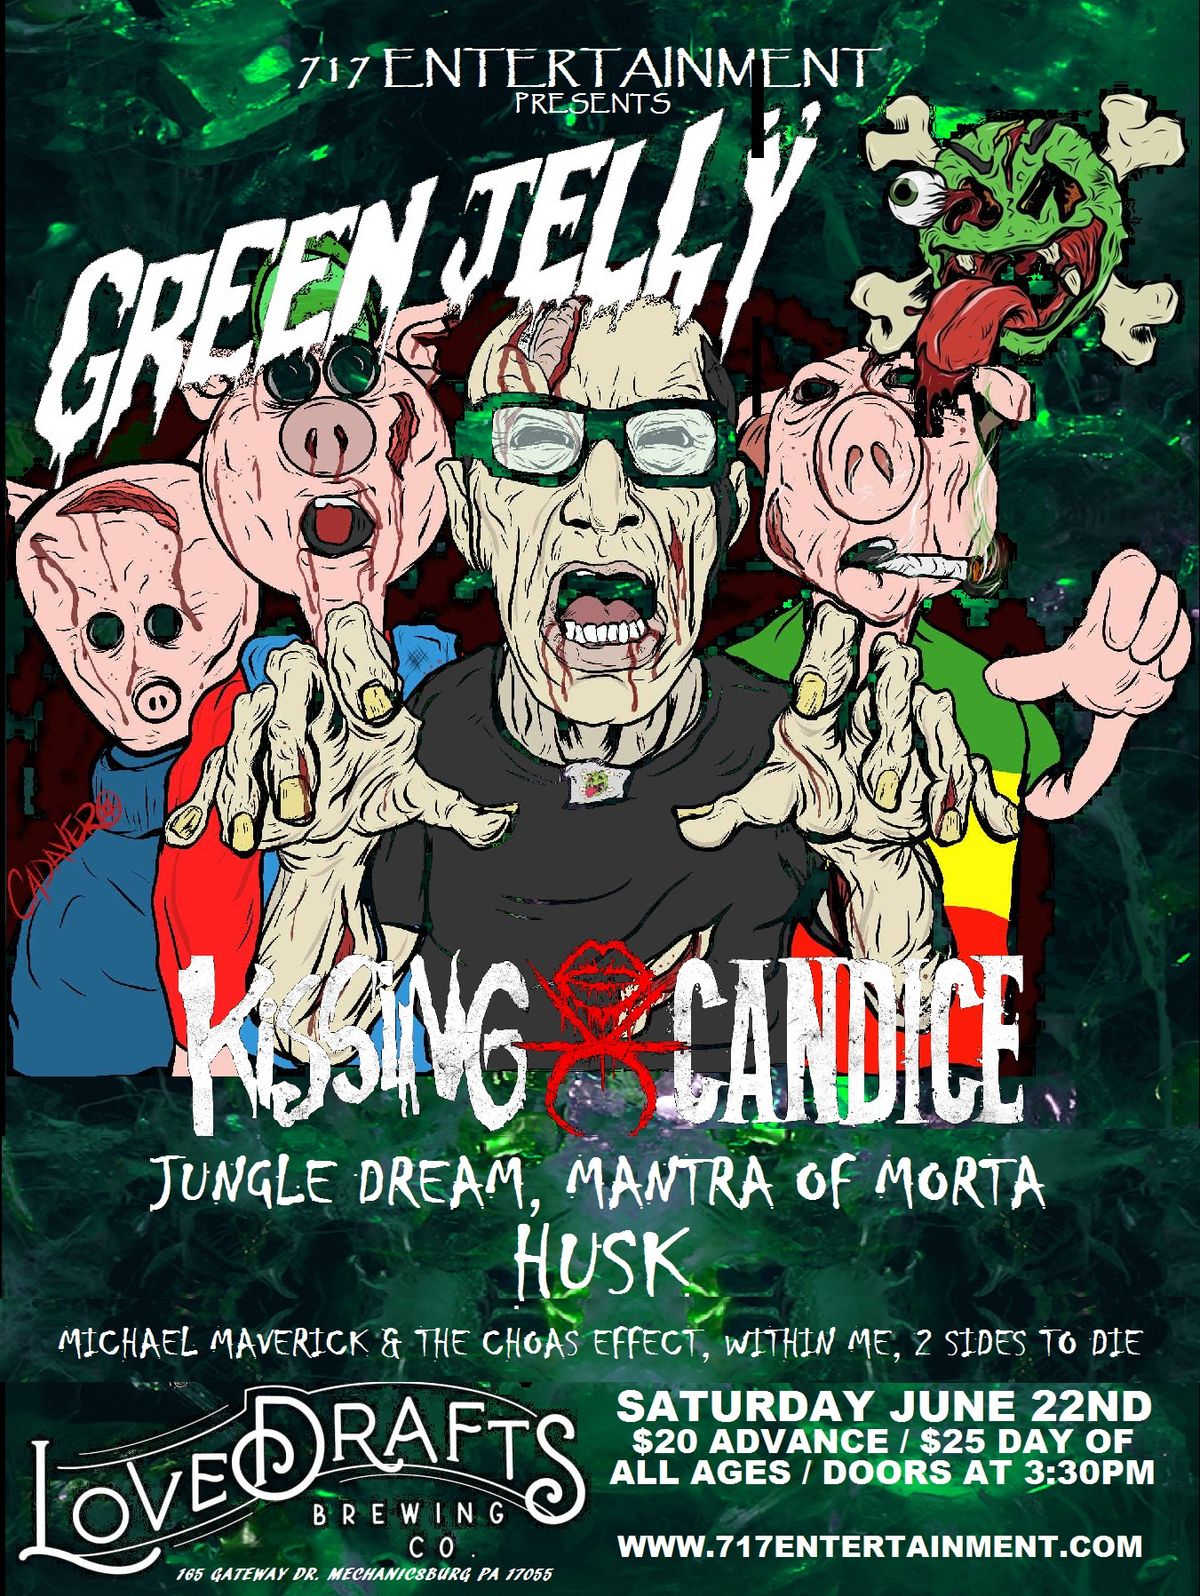 Green Jelly Punk Rock Circus w\/ Kissing Candice & More at Lovedrafts 